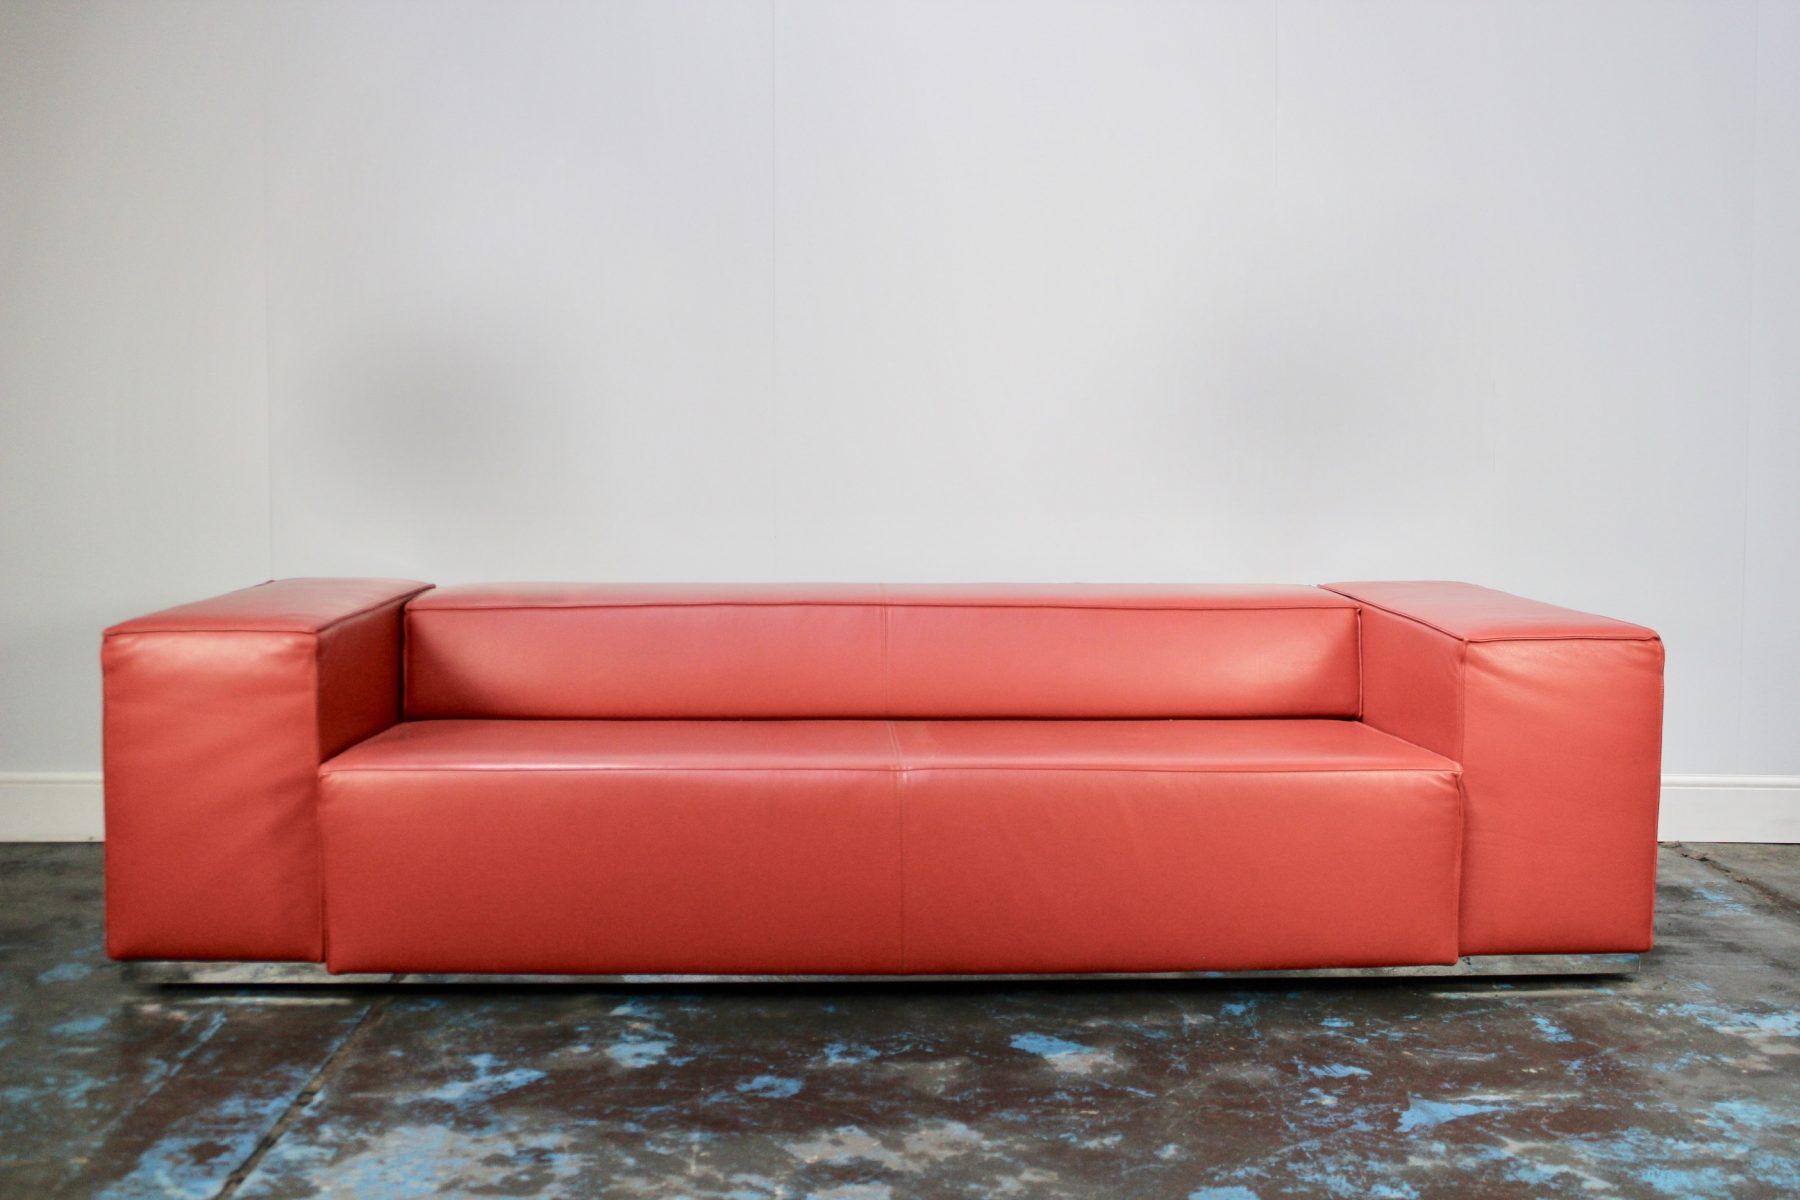 On offer on this occasion is ultra-rare (i suspect you will not find another) huge, superb, immaculately-presented 3-Seat “Big Blox” Model 180 Sofa Bed with an Extendable -Seat, from the world renown Italian furniture house of Cassina.

As you